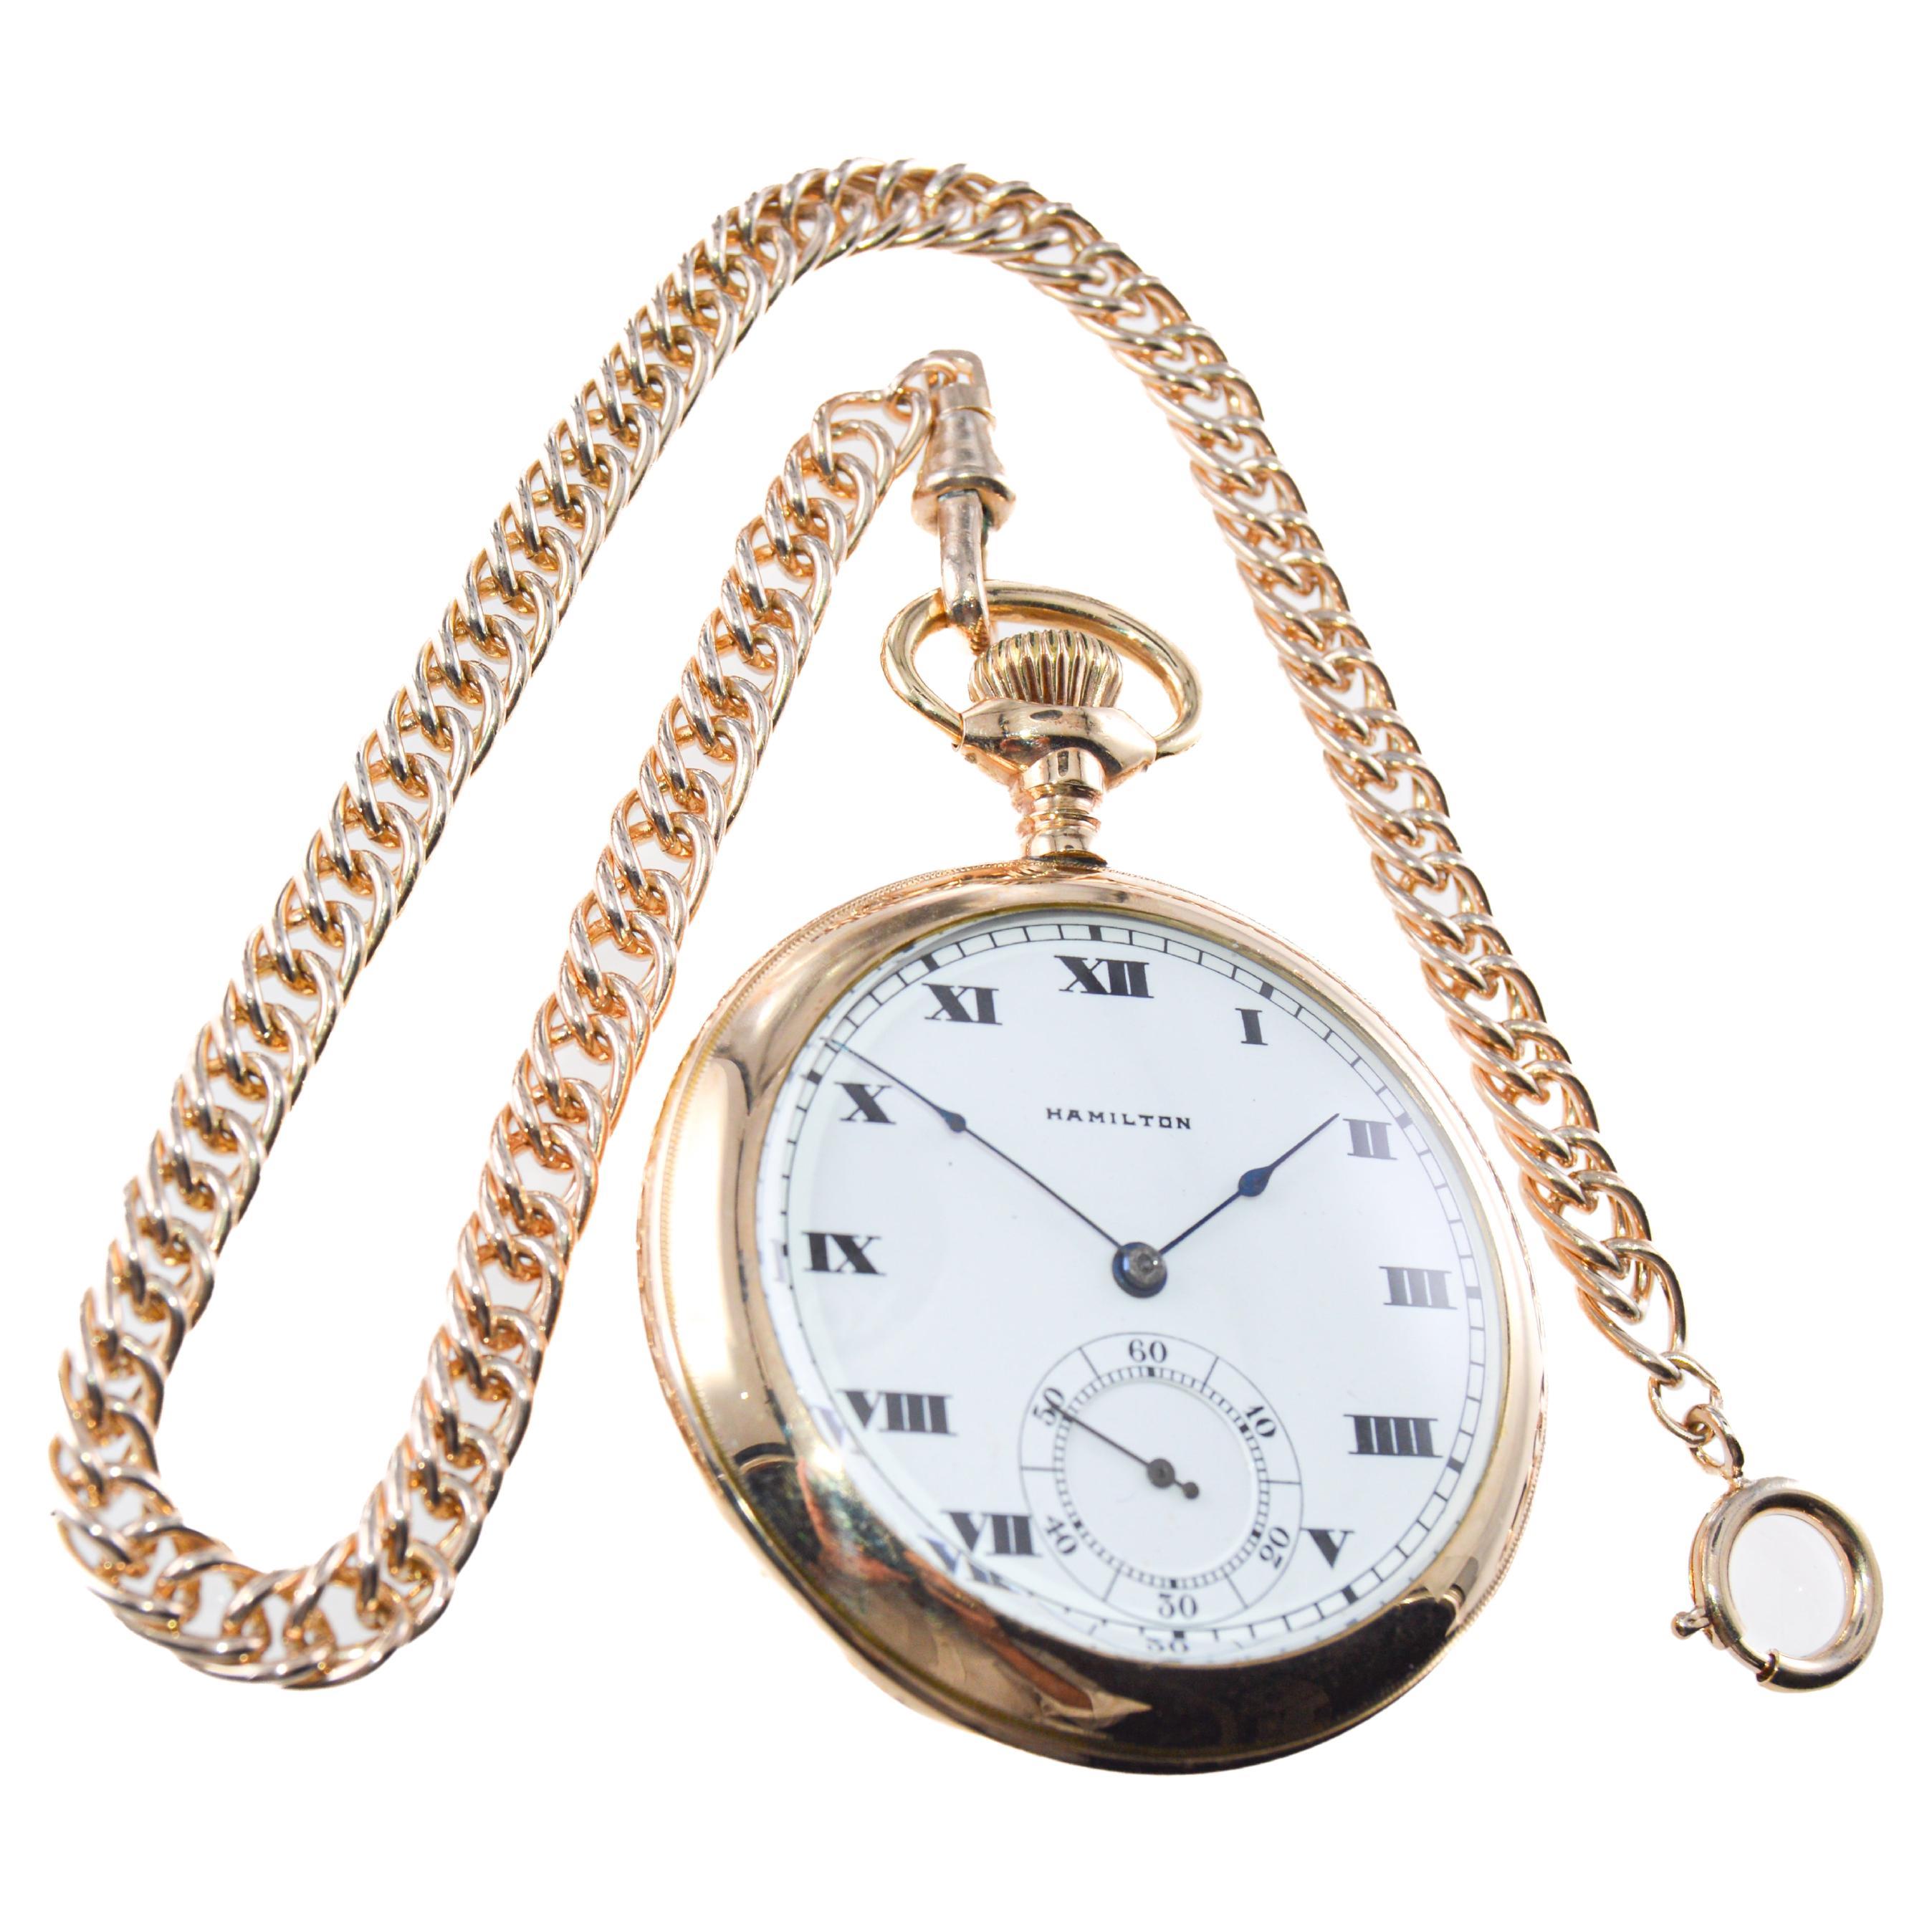 FACTORY / HOUSE: Hamilton Watch Company
STYLE / REFERENCE: Open Faced Pocket Watch
METAL / MATERIAL: Yellow Gold Filled / Hand Engraved Case
CIRCA / YEAR: 1916
DIMENSIONS / SIZE: Diameter 57mm
MOVEMENT / CALIBER: Manual Winding / 17 Jewels / Caliber